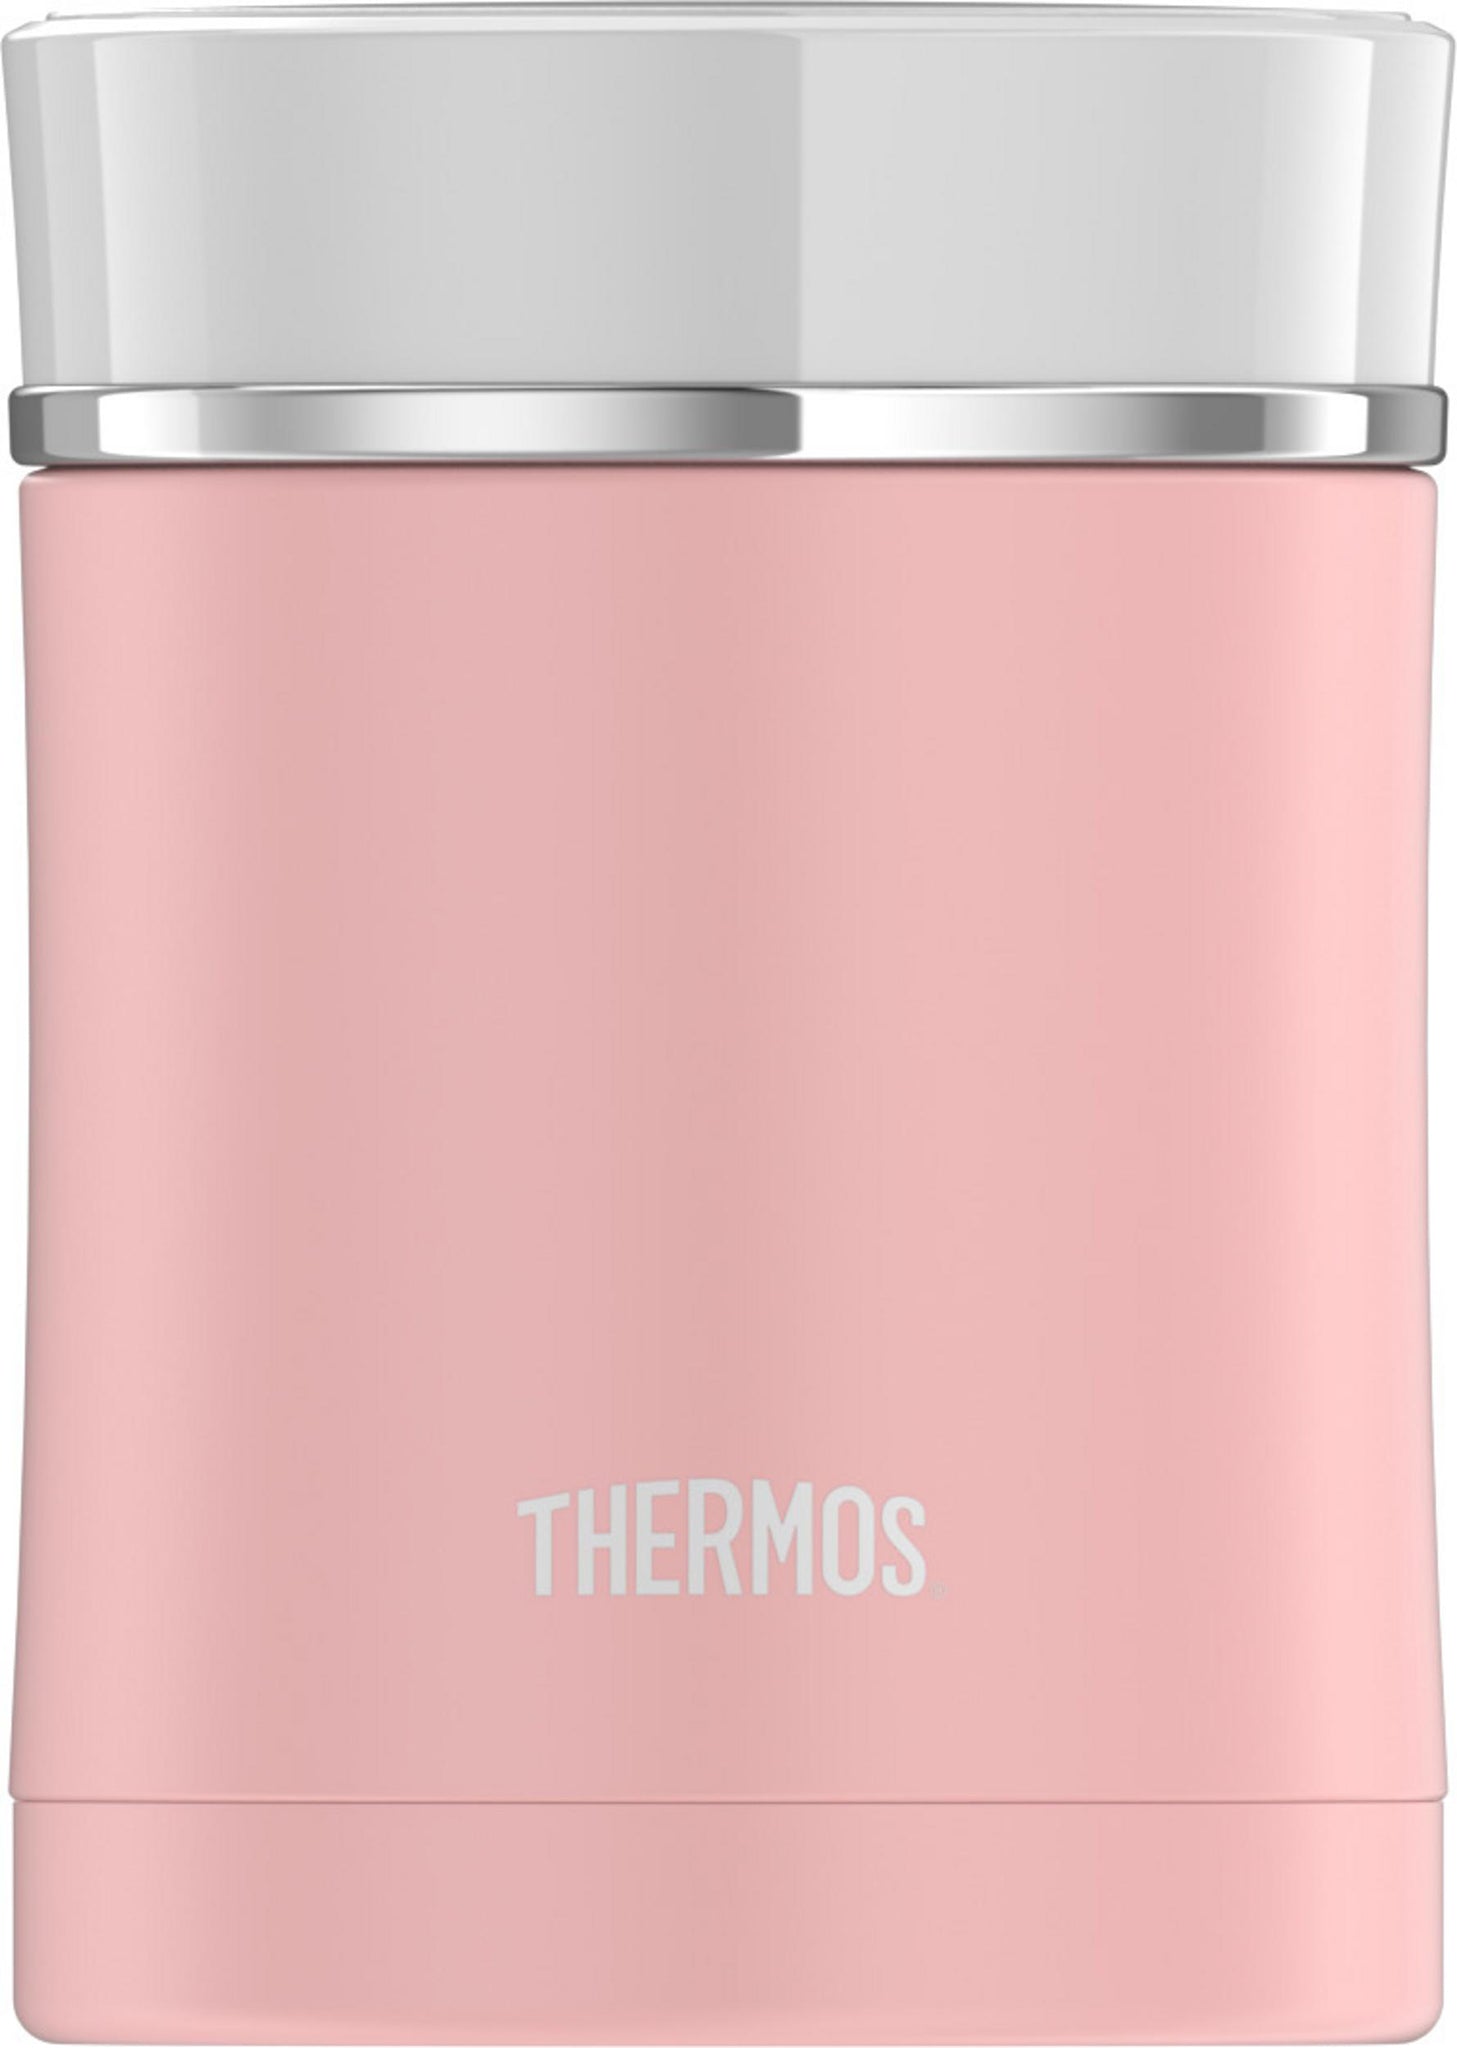 https://www.laguildeculinaire.com/cdn/shop/products/NS3408PK4_contenant_alimentaire_thermos_rose_laguildeculinaire.jpg?v=1642041811&width=1457